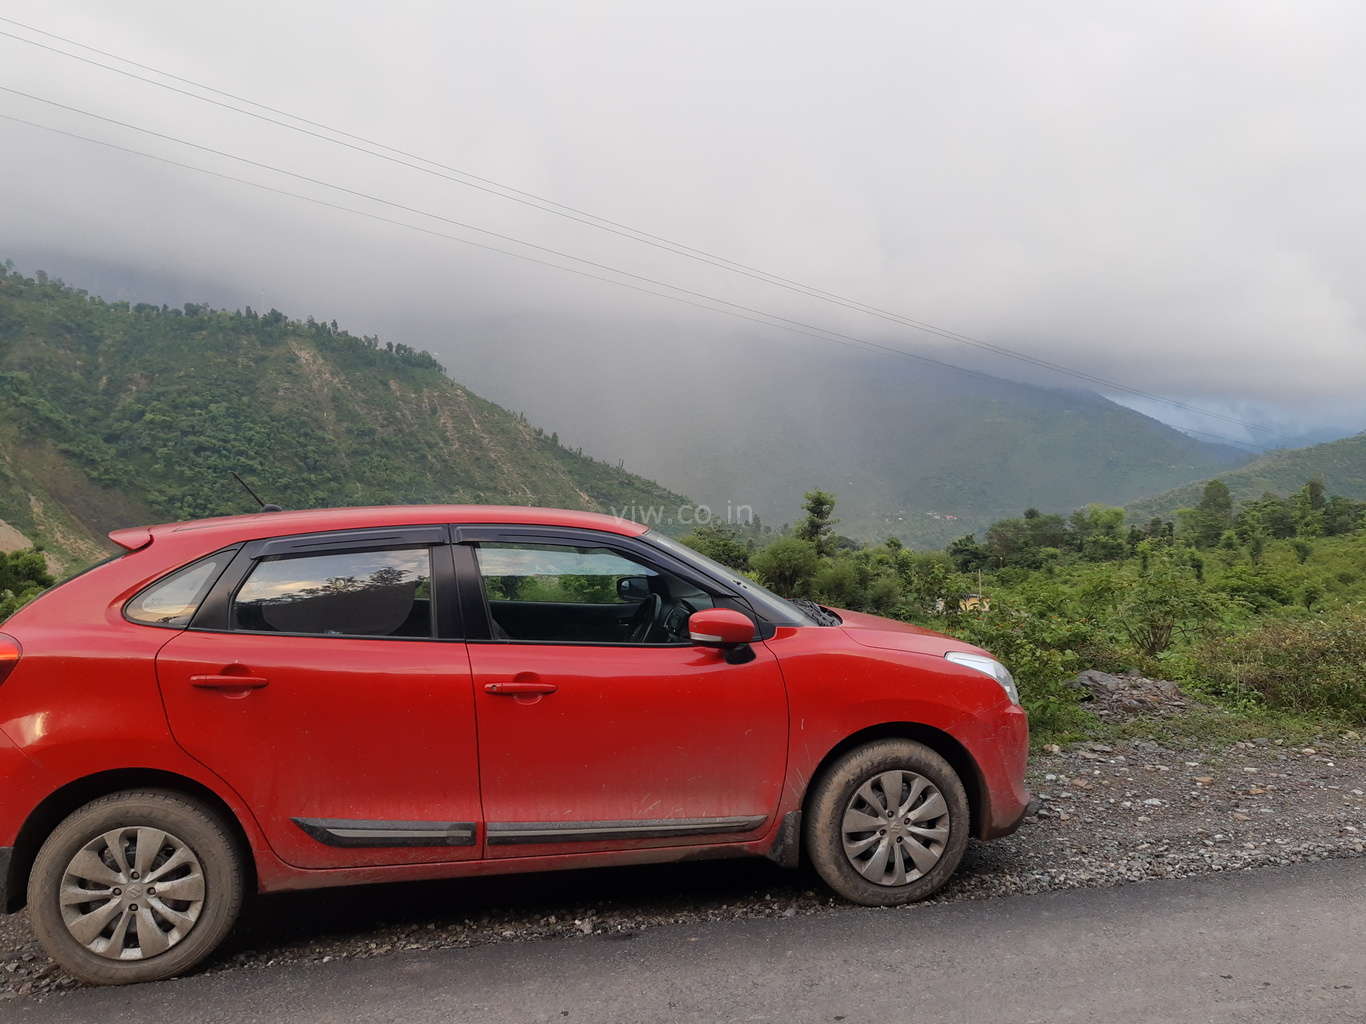 Driving Baleno in extremes weather of Himalayas